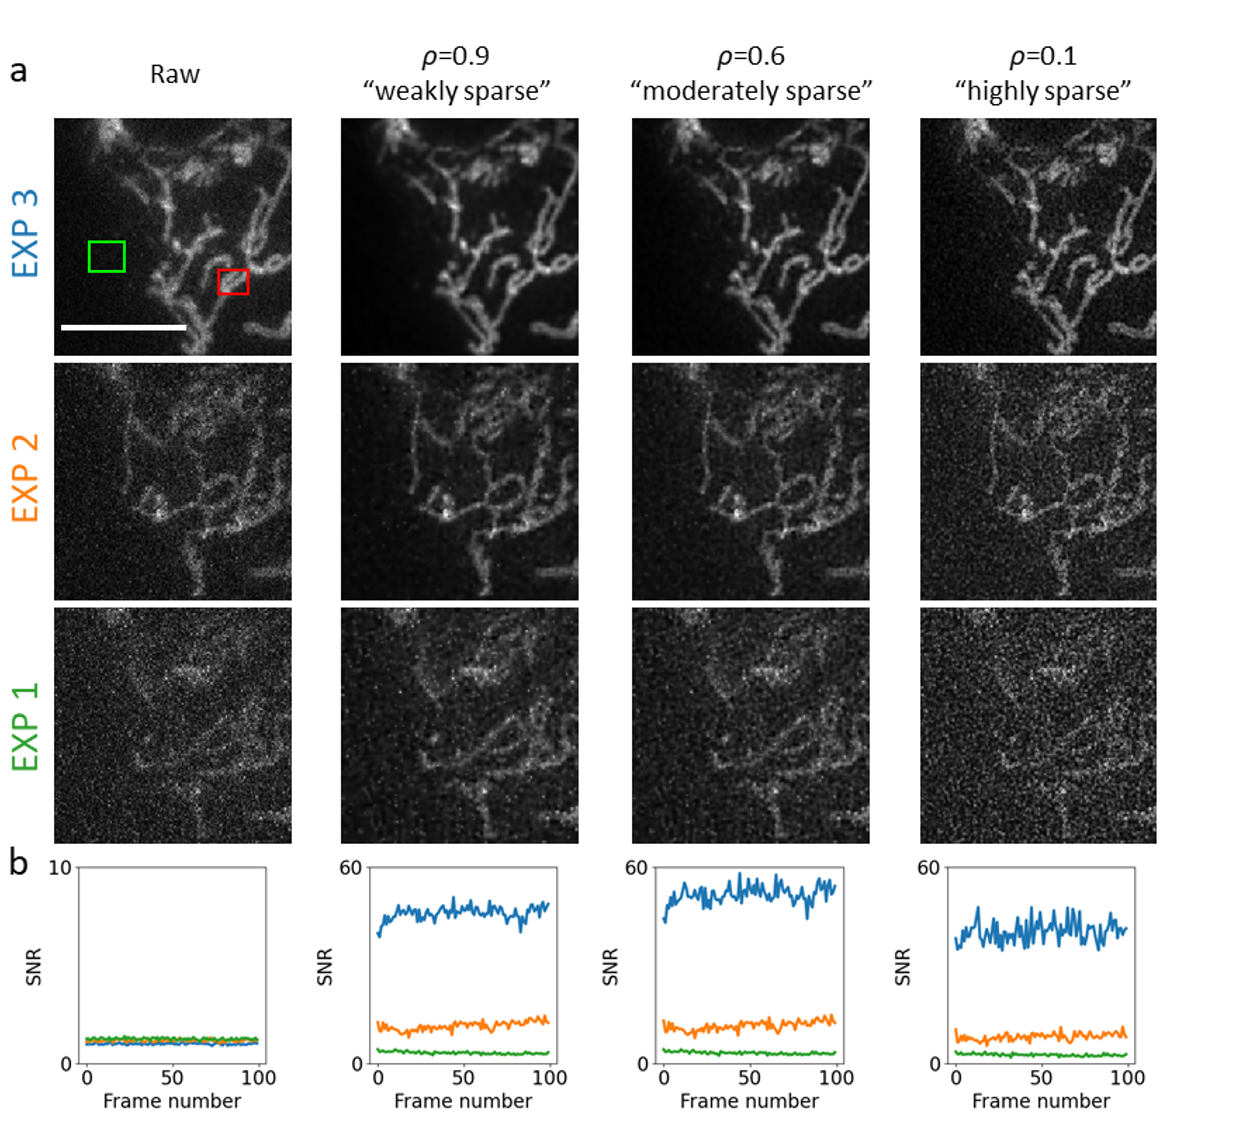 SPITFIR(e) image reconstruction applied to wide-field multifocus microscopy (MFM) with different amounts of sparsity, exposure and illumination values. Data are temporal series (100 time points) of 3D stacks composed of nine planes each depicting mitochondria in U2OS cells transfected with TOM20 (translocase of outer mitochondrial membrane) fused to GFP (GFP-TOM20). Exposure time: 50 ms. The sample is imaged with three different doses of illumination light. MFM allows simultaneous acquisition of a 3D stack of nine images equally spaced with (dz = 330 nm) focal 2D images (pixel size = 120 nm). (a) The image grid displays the deconvolution results on the 6th plane for successive increasing laser power values (EXP 1, 2 and 3). The 3D stacks have been deconvolved with 3D Gaussian PSF model (σxy=1.5\sigma _{xy} = 1.5 pixels and σz=1.5 \sigma _z = 1.5 pixels) and with three different levels of sparsity ("weak", "moderate", and "high"). (b) The plots are SNR values calculated for the 6th plane at each time-point as follows: SNR = Power(signal) / Power(background) = |Ω(xS)|-1∑x∈Ω(xS)I(x)2/|Ω(xB)|-1∑x∈Ω(xB)I(x)2|\Omega (x_S)|^{-1} \sum _{x \in \Omega (x_S)} I(x)^2 / |\Omega _(x_B)|^{-1} \sum _{x \in \Omega (x_B)} I(x)^2 , where Ω(xS)\Omega (x_S) (with size |Ω(xS)||\Omega (x_S)|) and Ω(xB)\Omega (x_B) (with size |Ω(xB)||\Omega (x_B)|) are two ROIs centered at pixels xSx_S (red ROI) and xBx_B (green ROI), respectively. Scale bar: 10 μ\mu m.